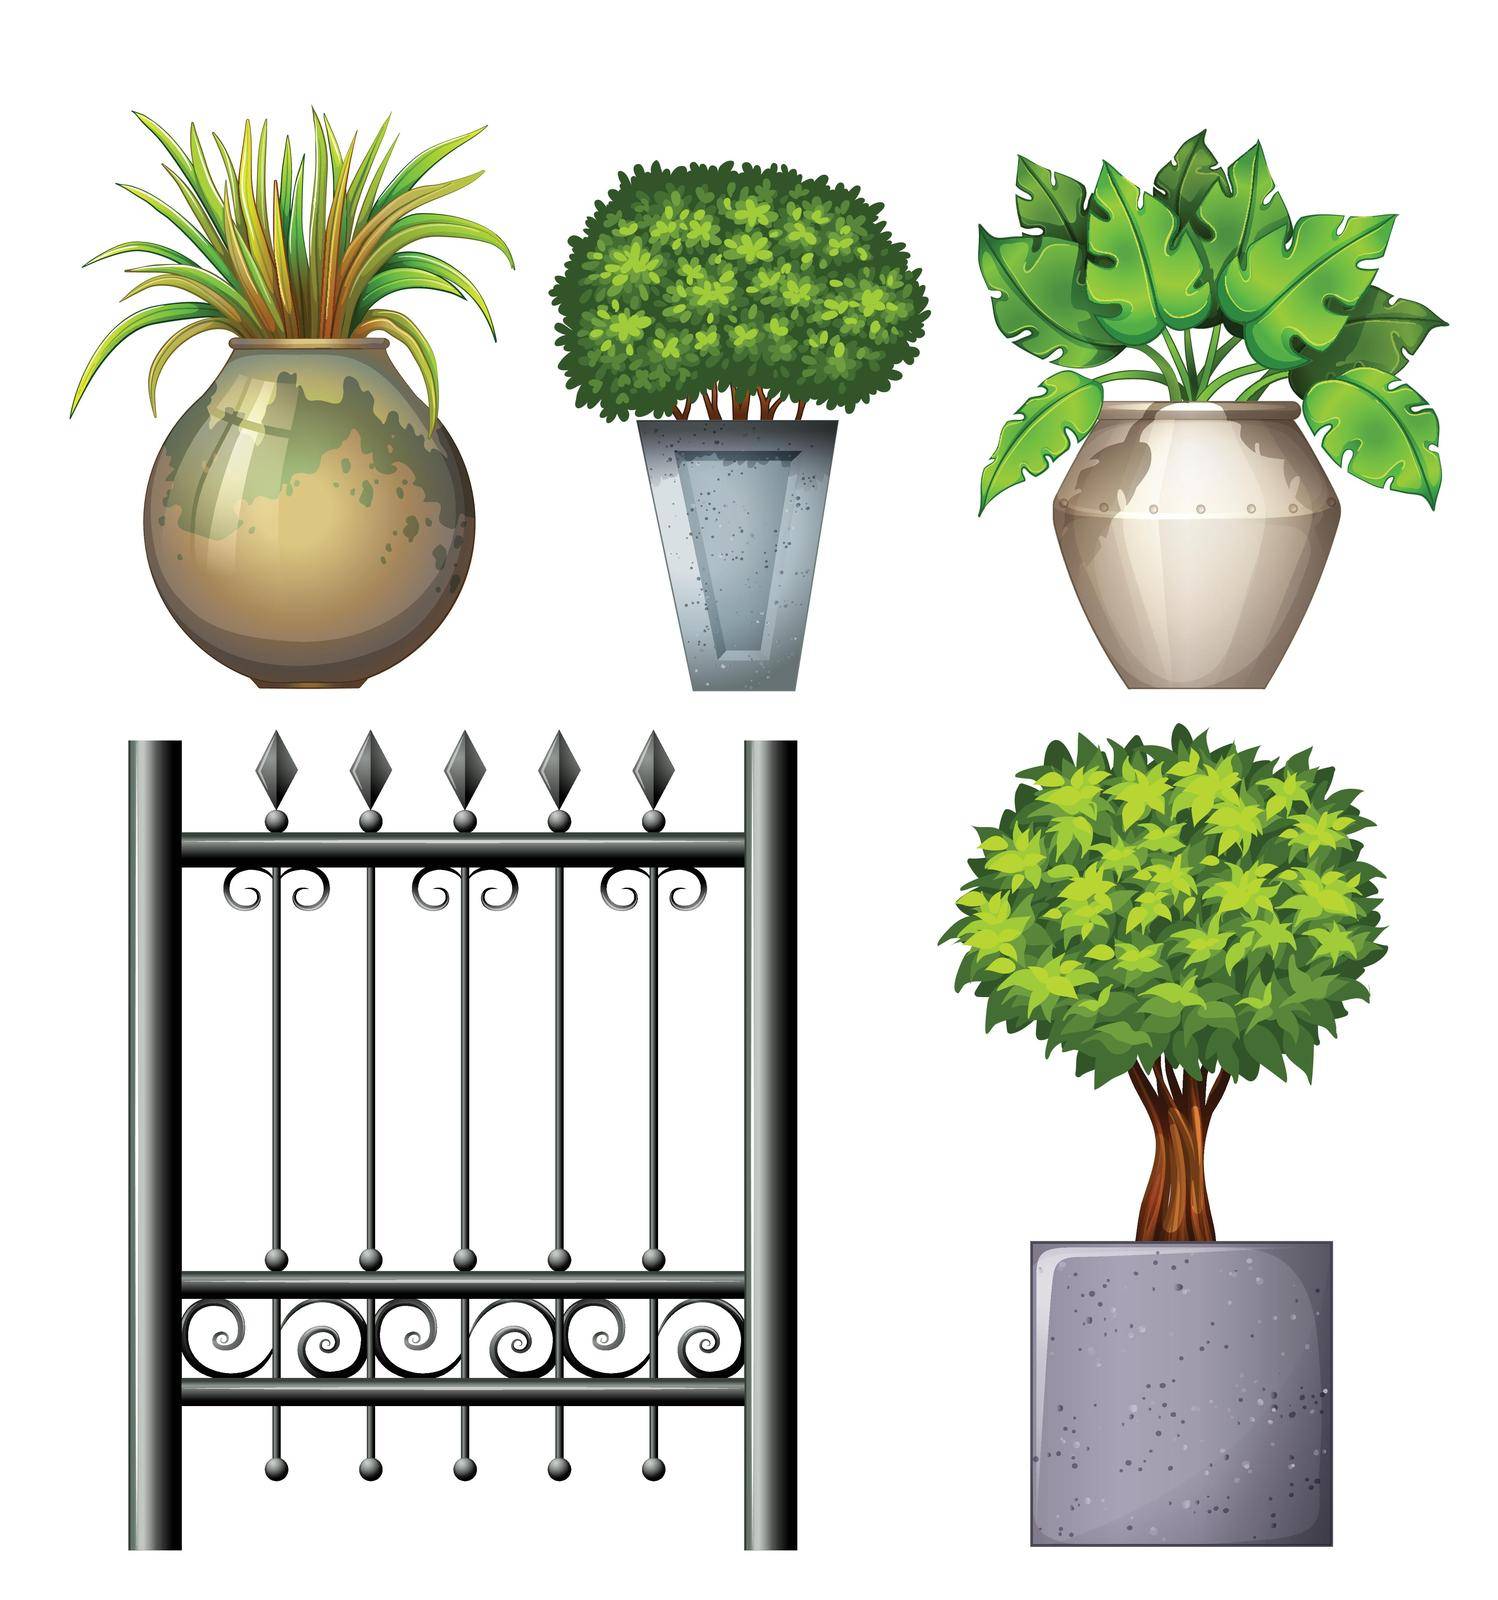 A steel gate and potted plants by iimages